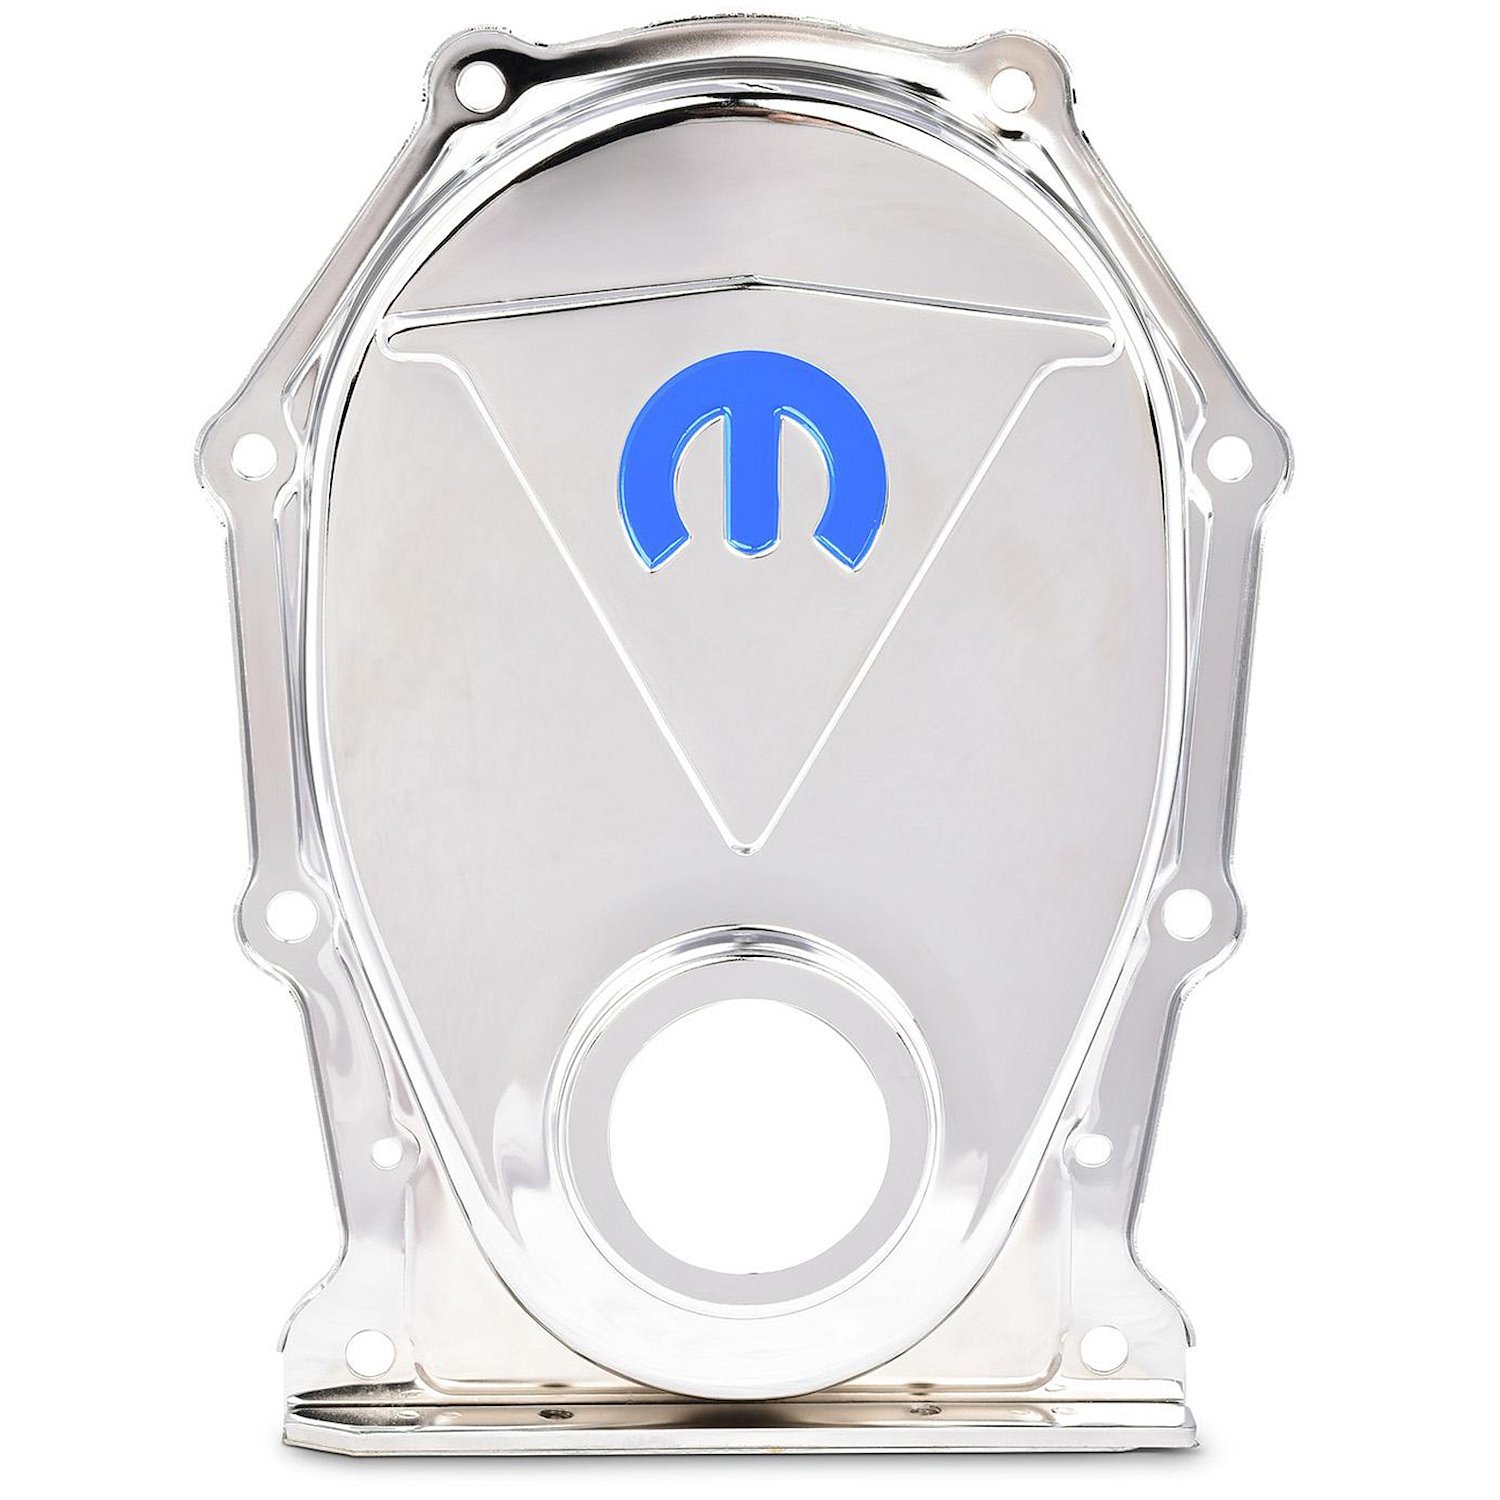 Officially-Licensed Mopar Timing Chain Cover